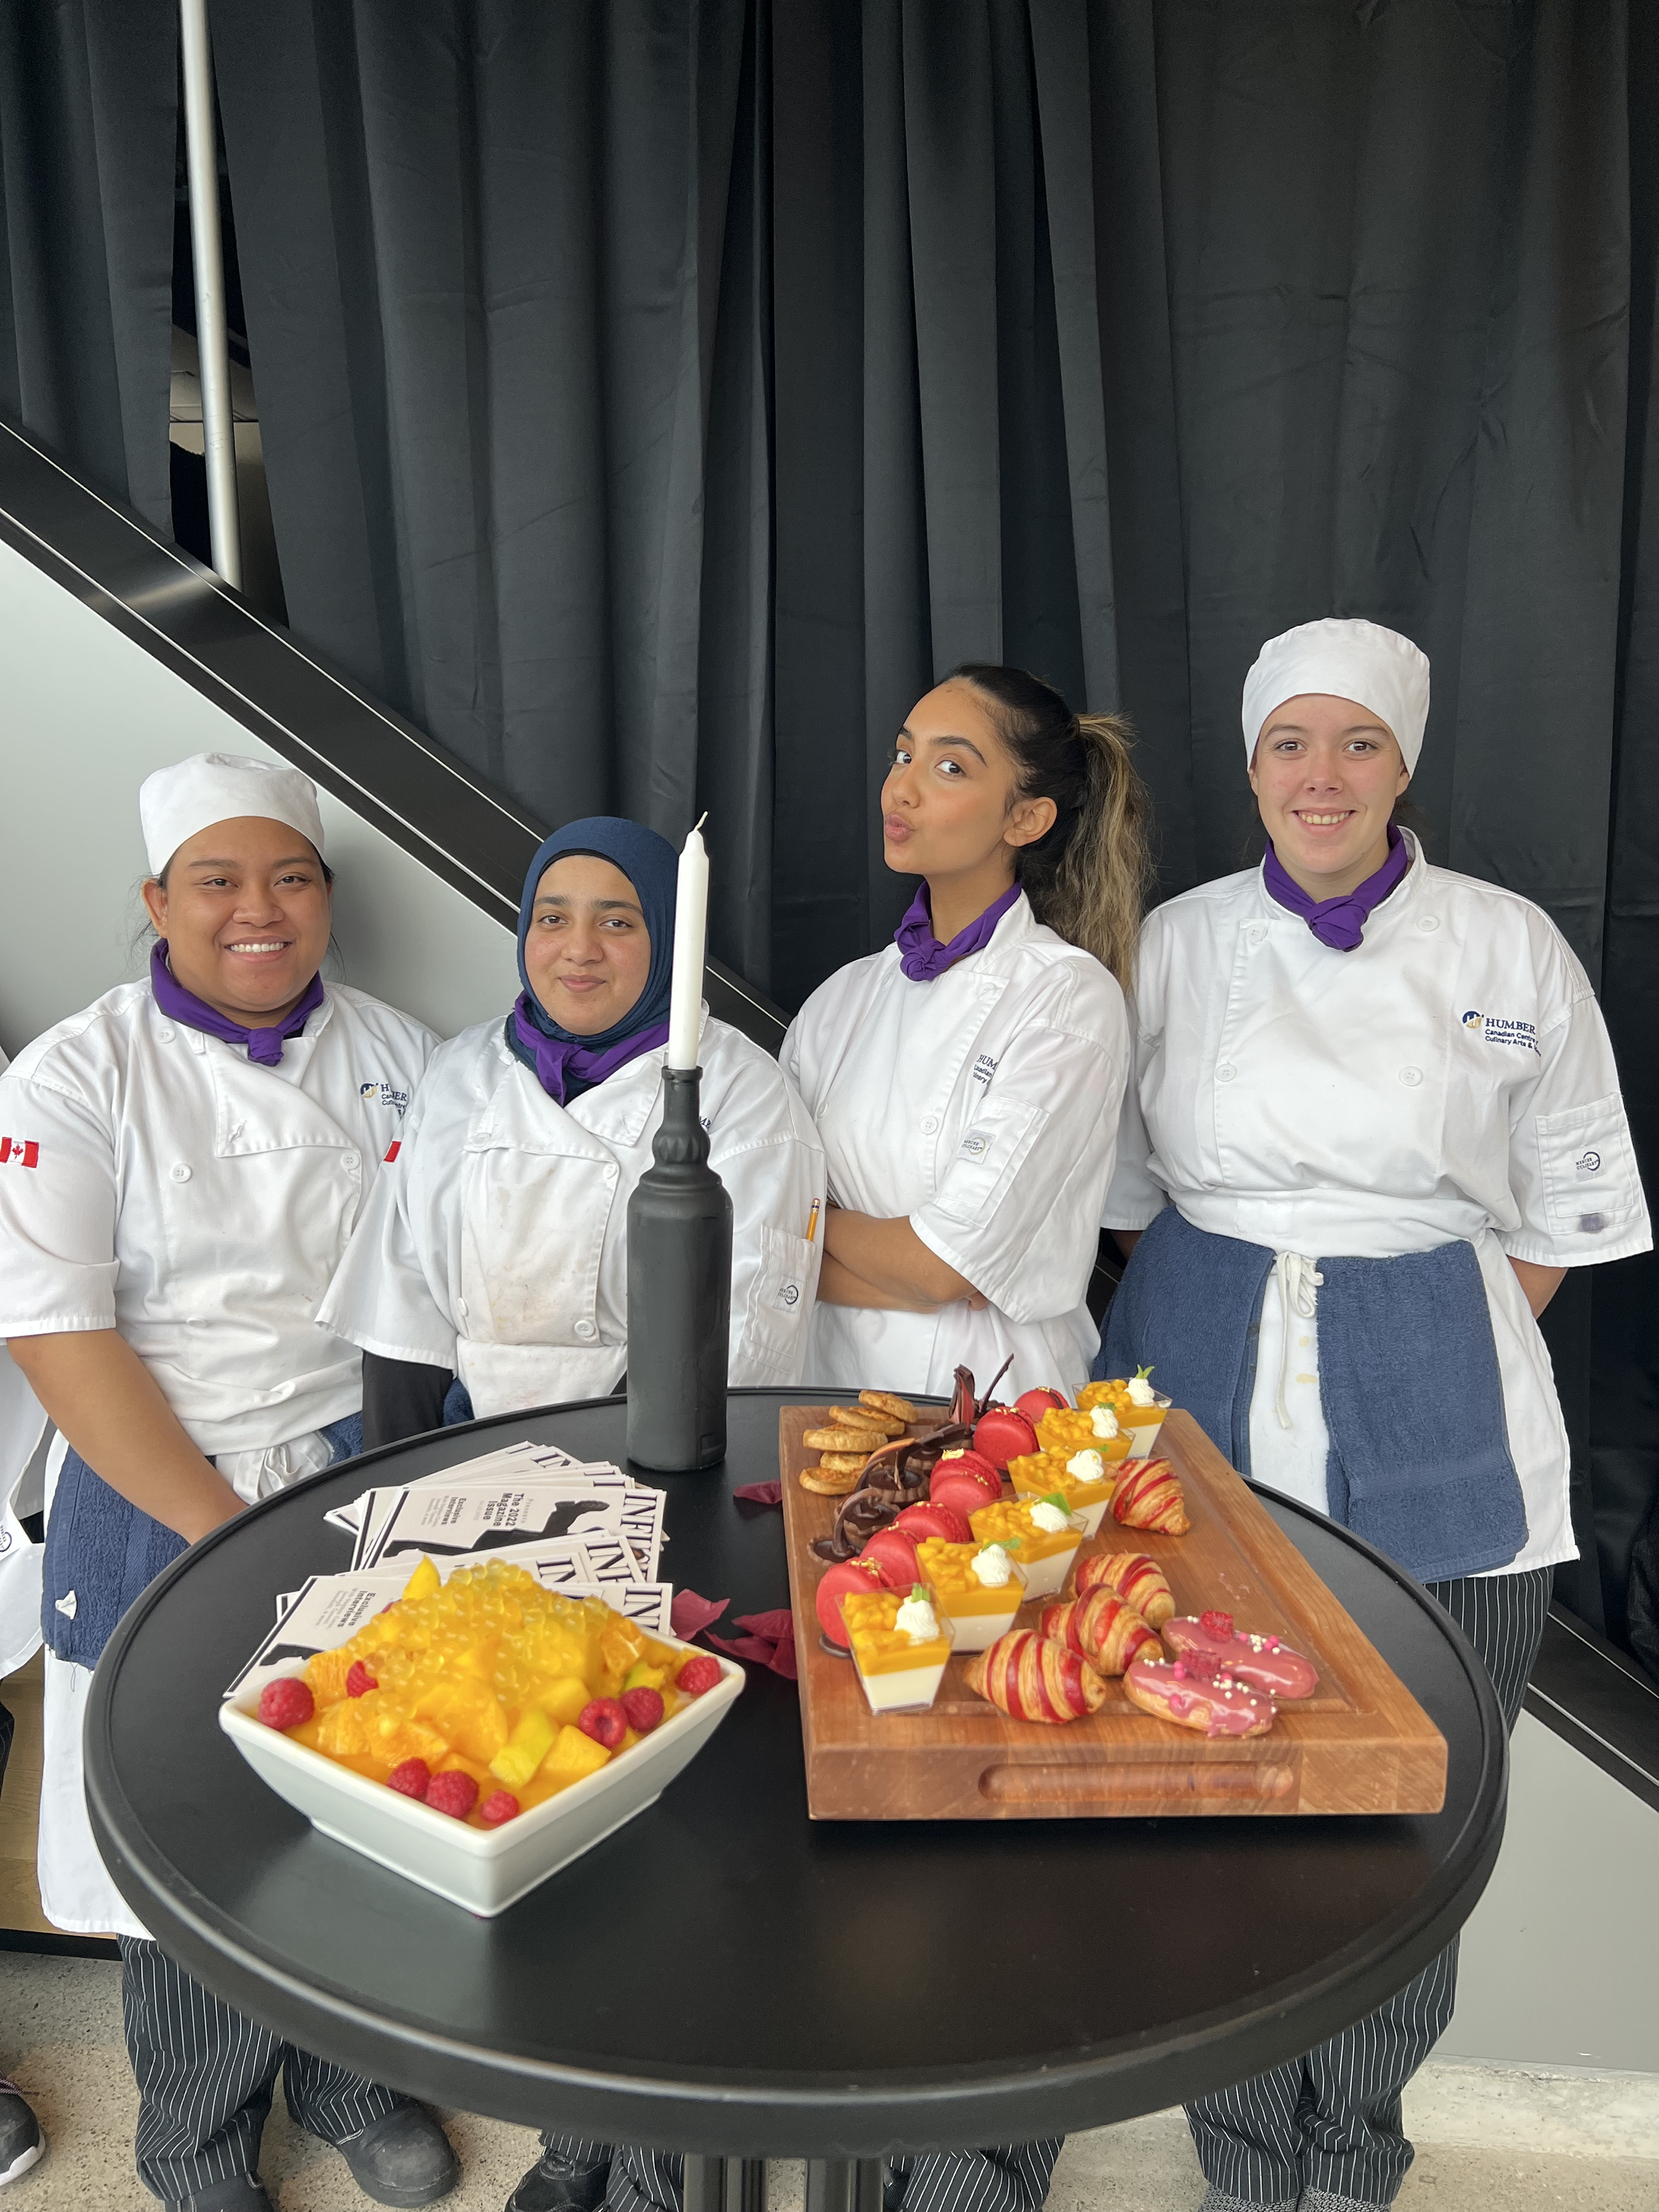 Four Humber College students stand in front of a table that has food on it.